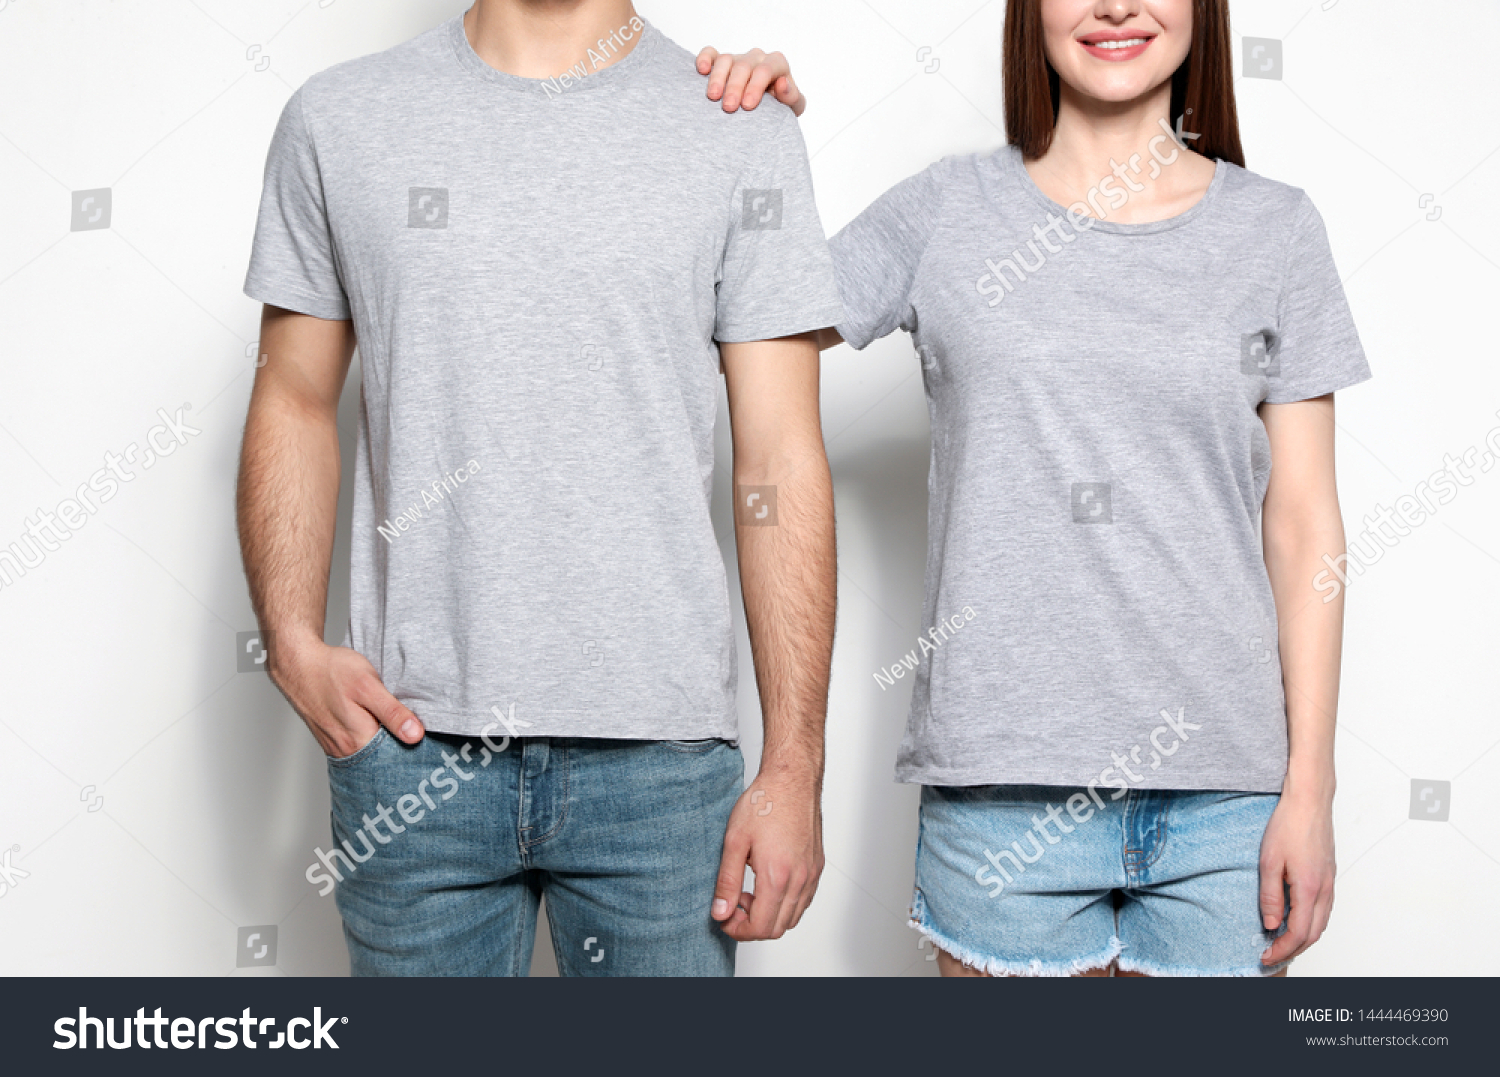 Young people in t-shirts on light background, closeup. Mock up for design #1444469390